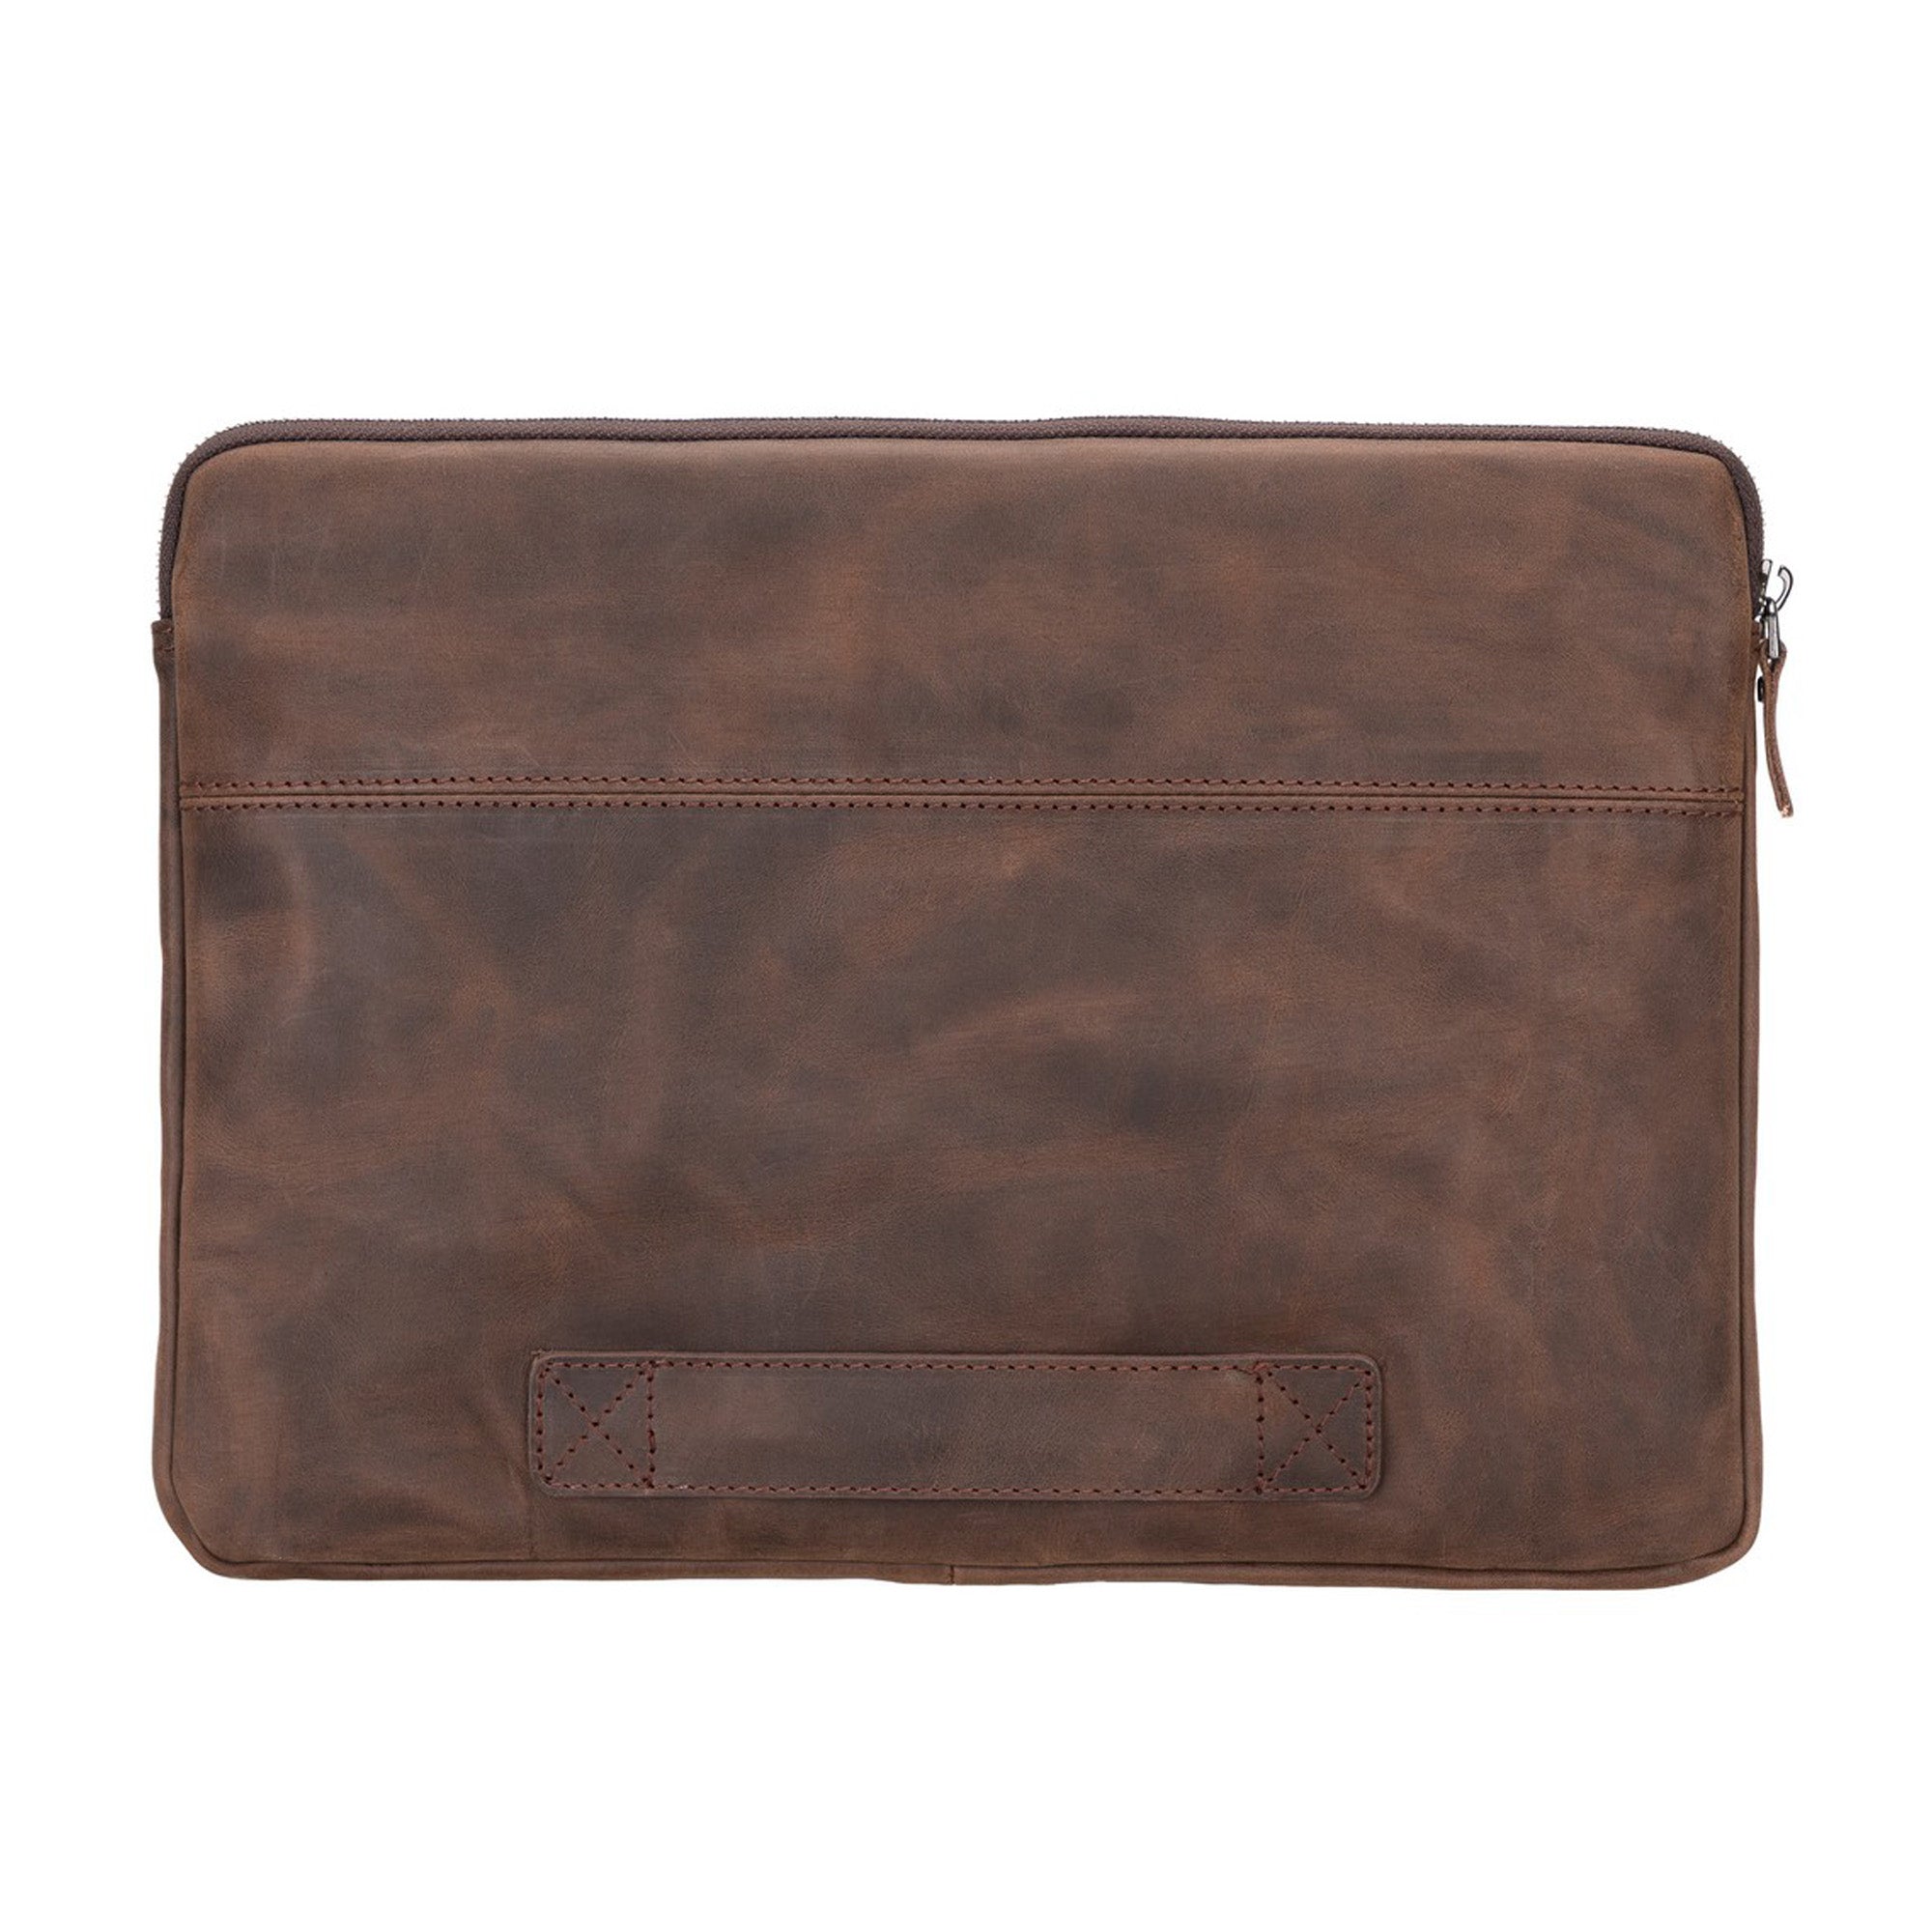 Awe Leather Case for Apple Macbook Pro 15" / Macbook Pro 16" - BROWN - saracleather